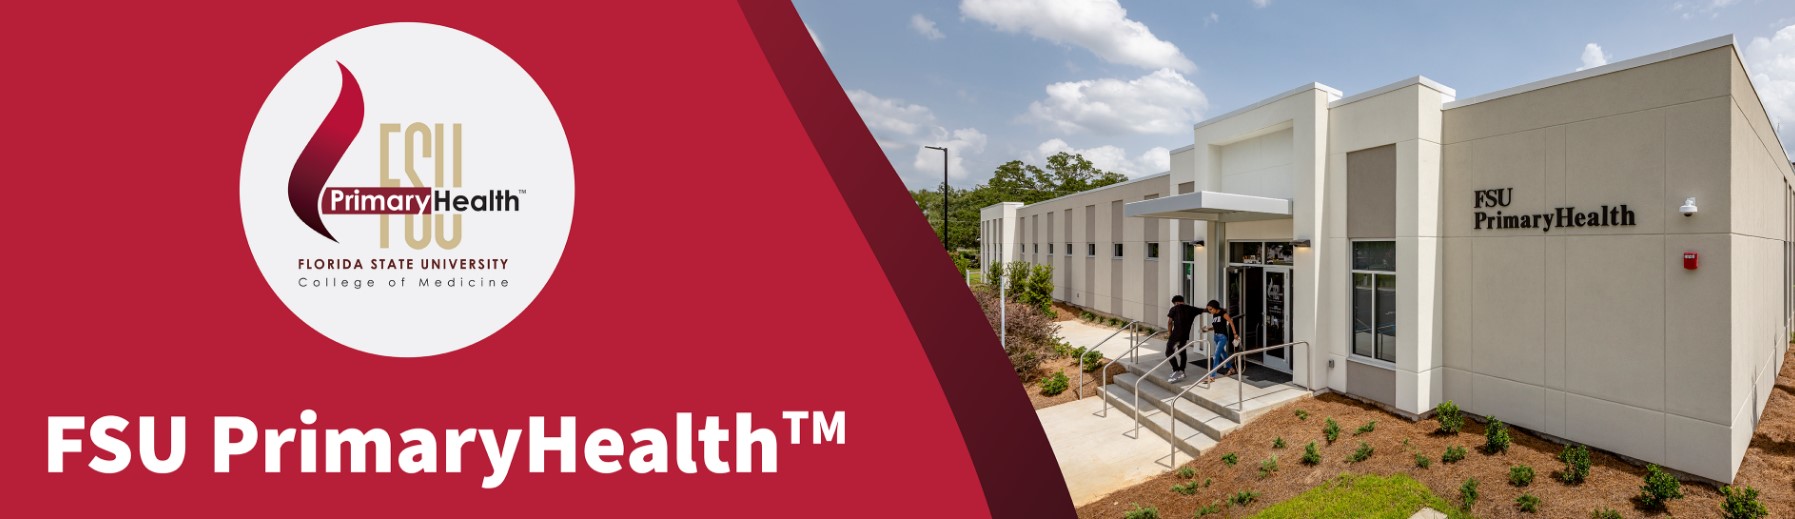 Photo of the FSU PrimaryHealth clinic building with the Florida State University PrimaryHealth logo prominently displayed.